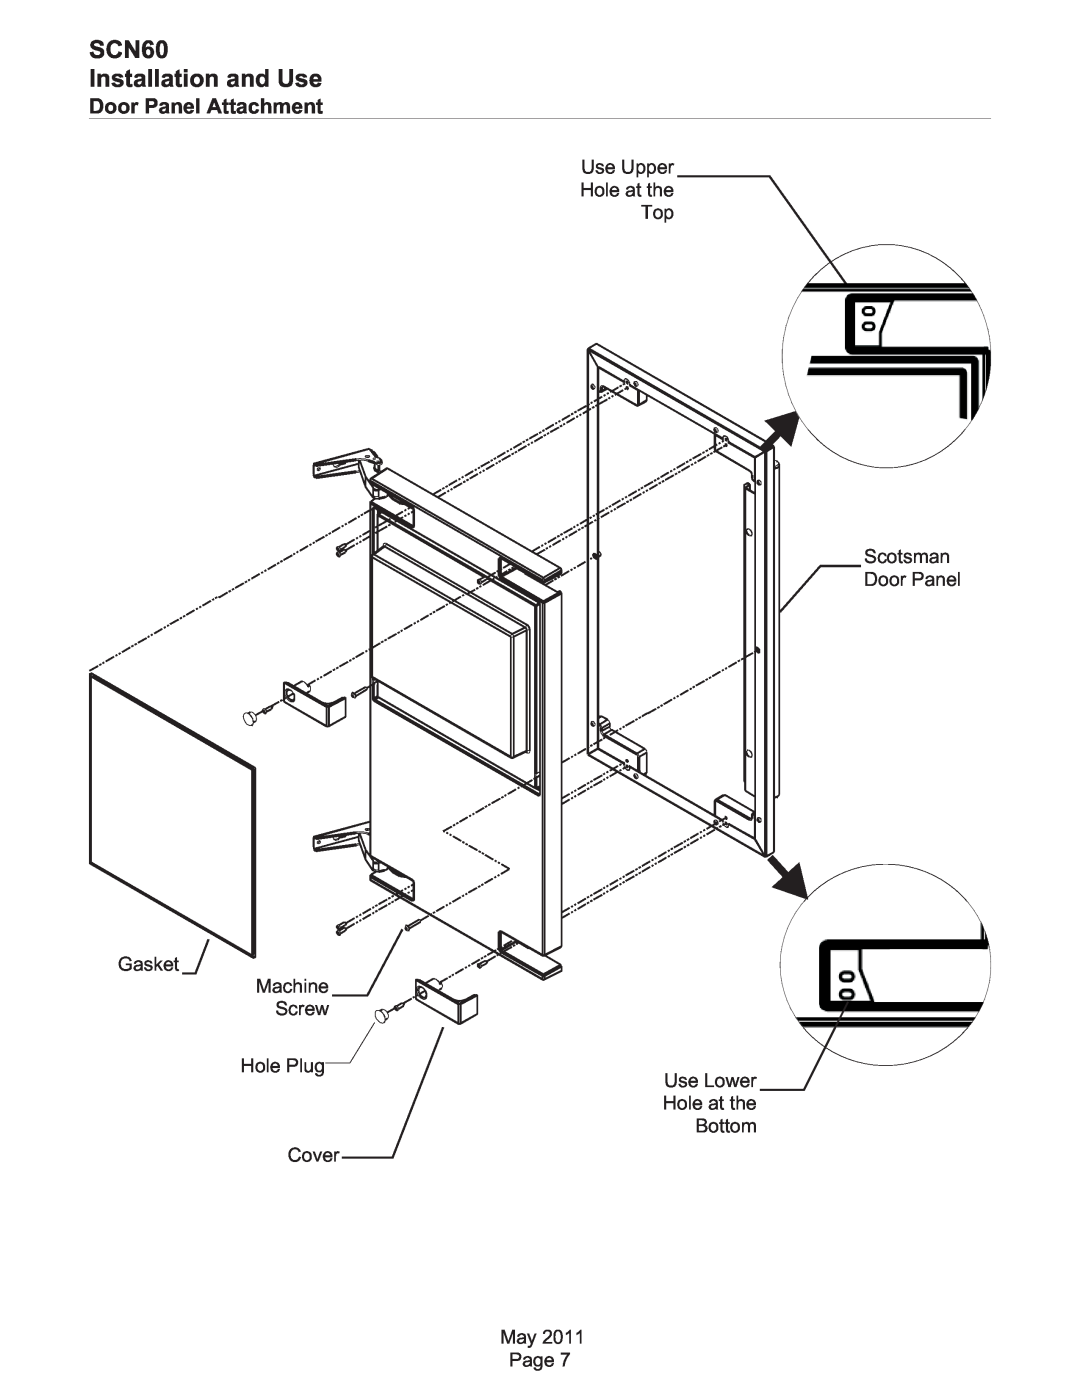 Scotsman Ice dimensions Door Panel Attachment, SCN60 Installation and Use 